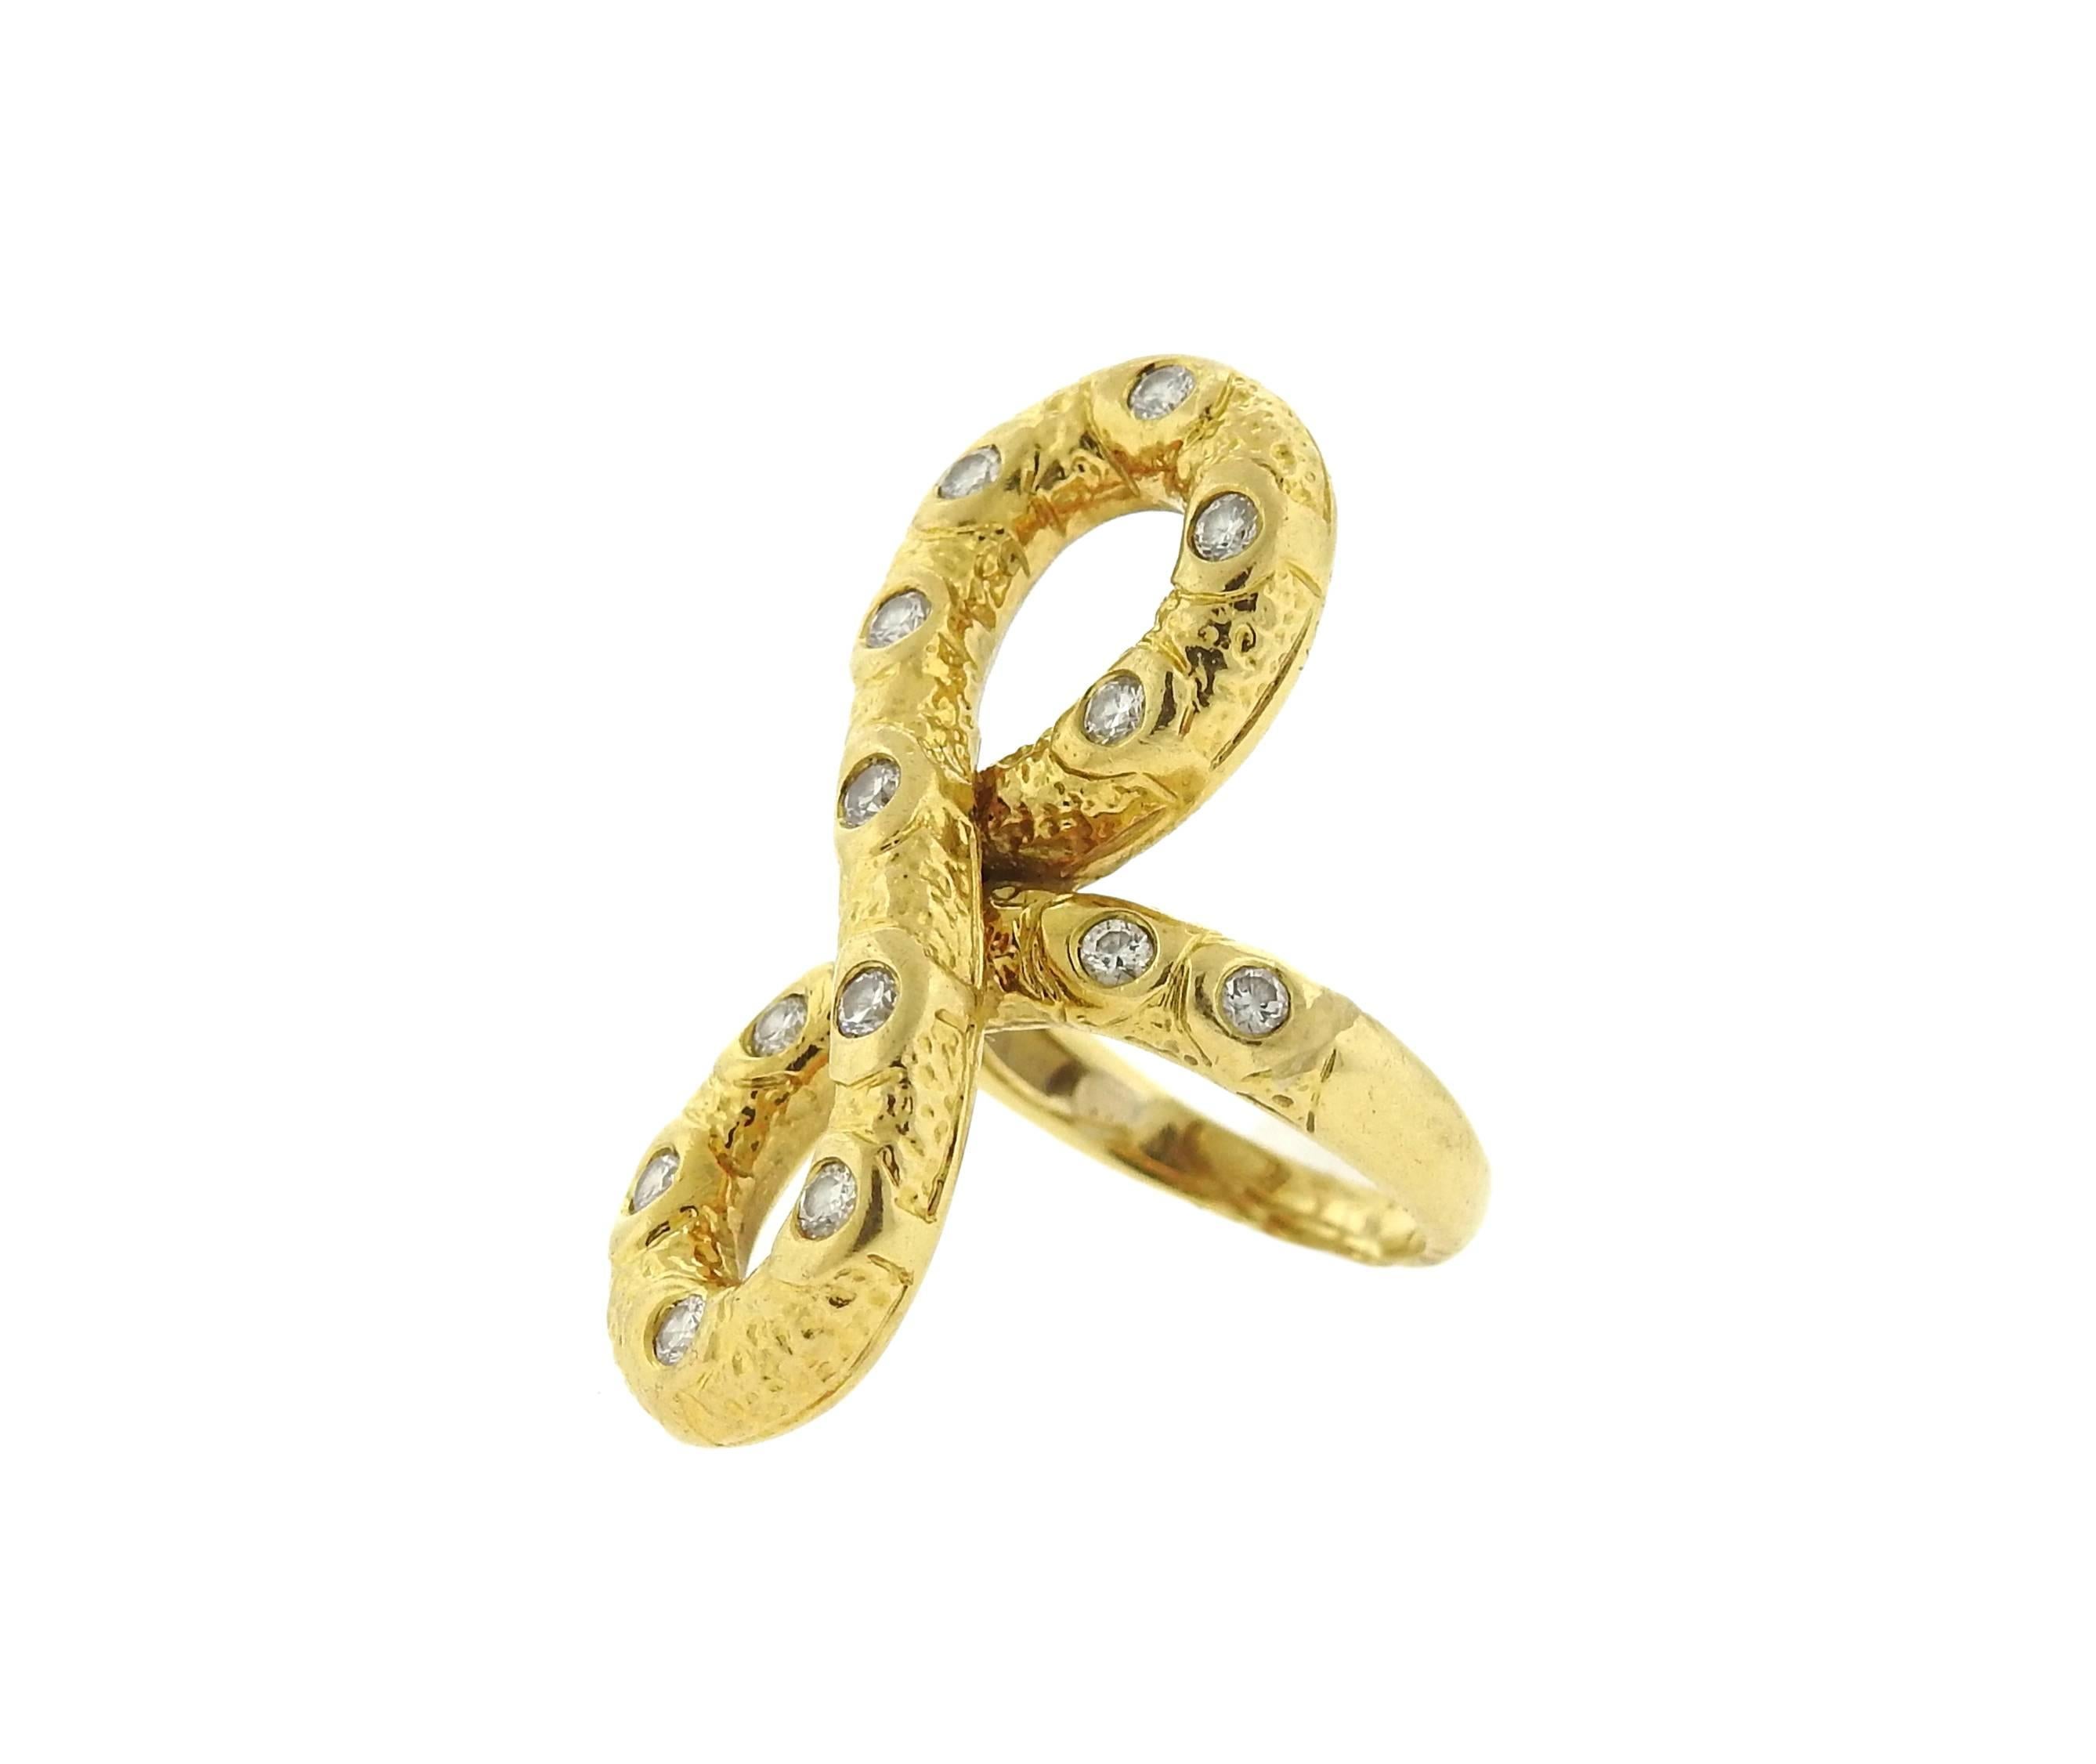 An 18k yellow gold infinity figure eight sign ring, crafted by Van Cleef & Arpels, decorated with approx. 0.45ctw in diamonds.  ring size - 5, ring top is 34mm x 13mm. Marked: VCA. Weight of the piece - 11.4 grams 